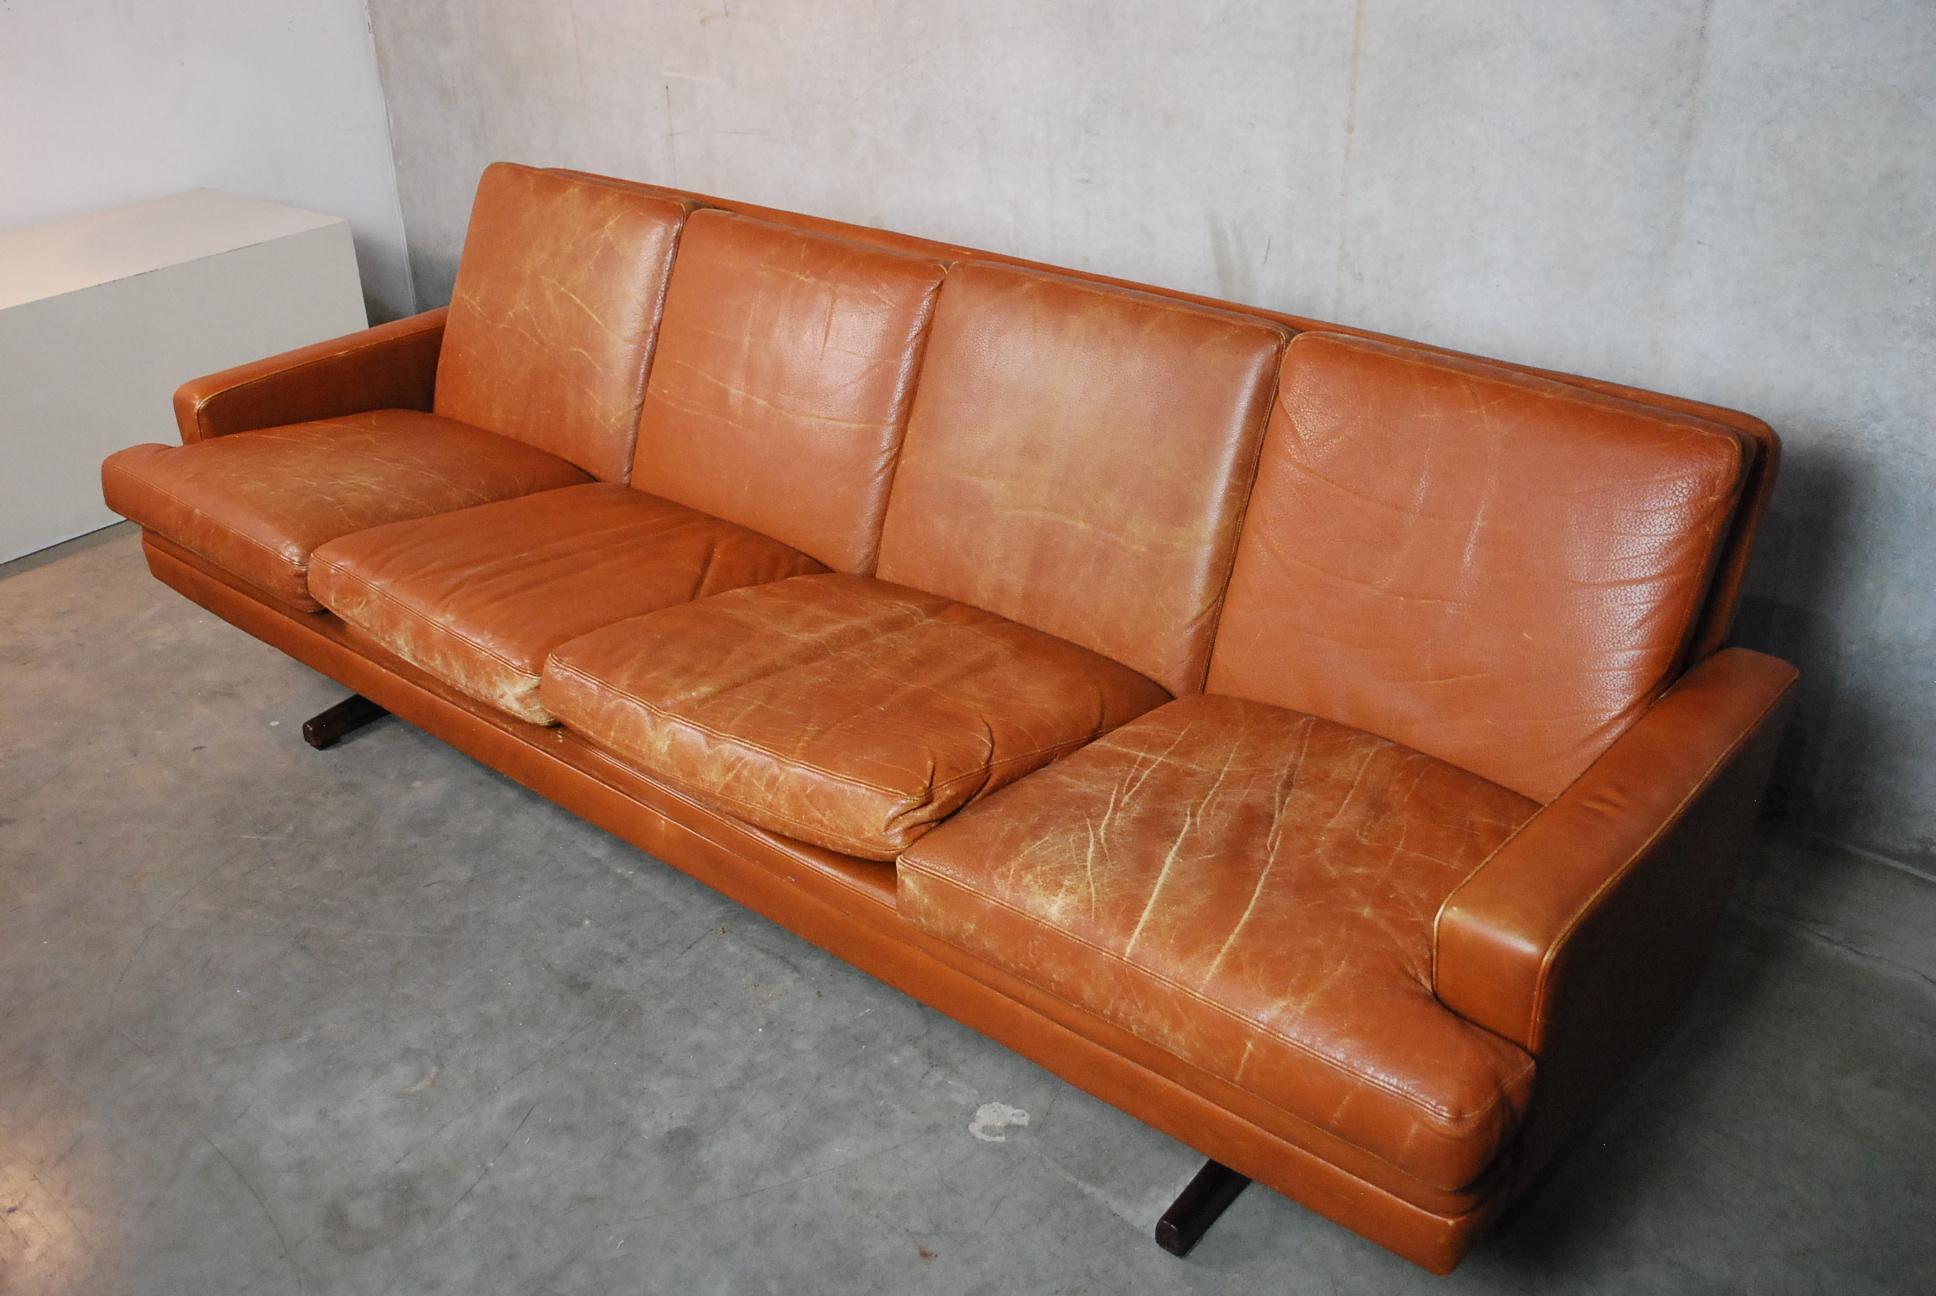 Model 807 by Fredrik Kayser for Vatne Møbler, Norway. This high-quality sofa with timeless design is upholstered in cognac colored leather with a beautiful natural patina.
The sofa rests on Shaker legs made of solid rosewood, very comfortable and